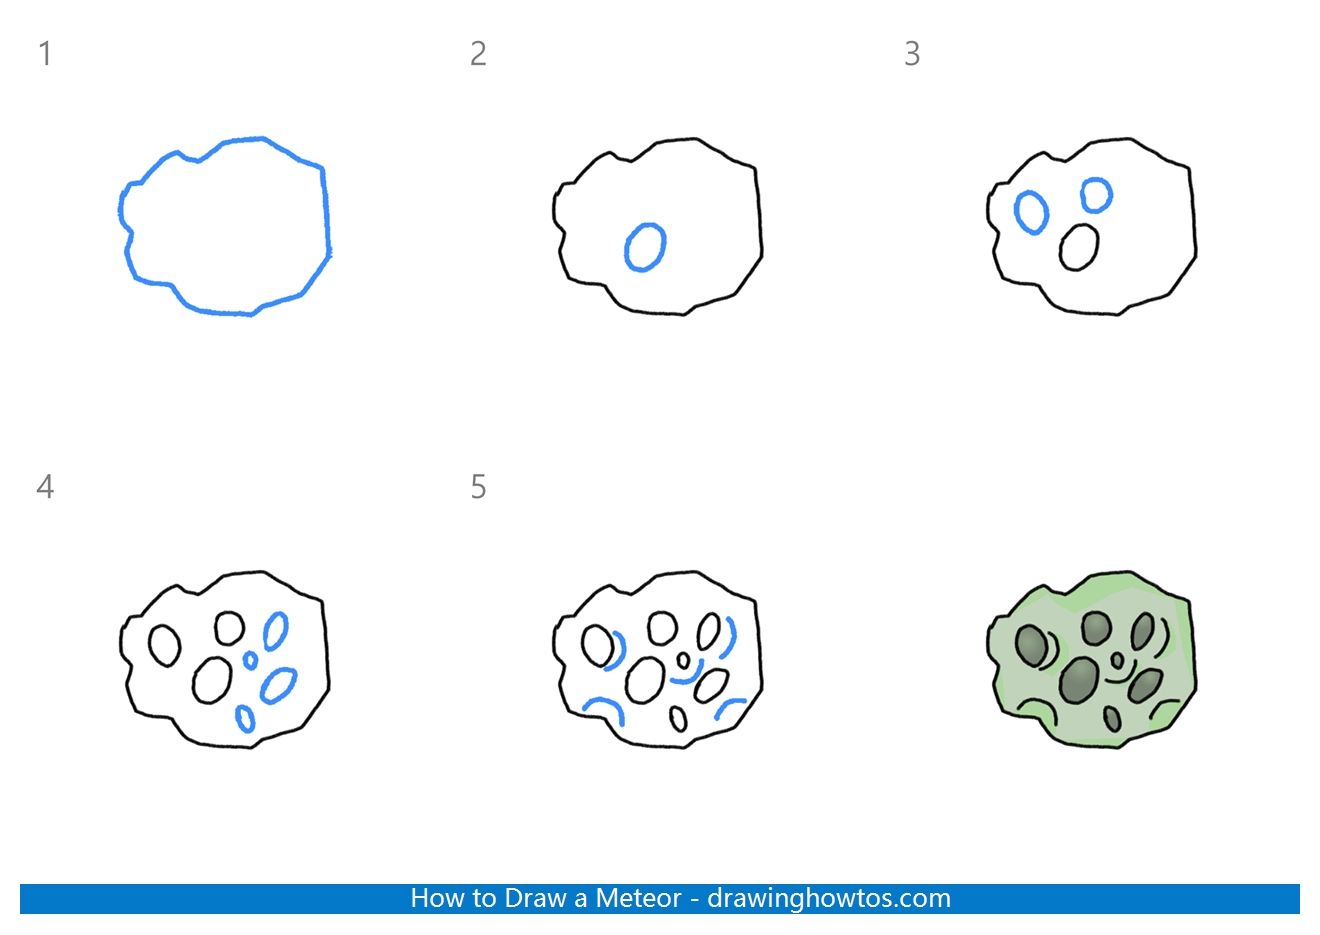 How to Draw an Asteroid Step by Step